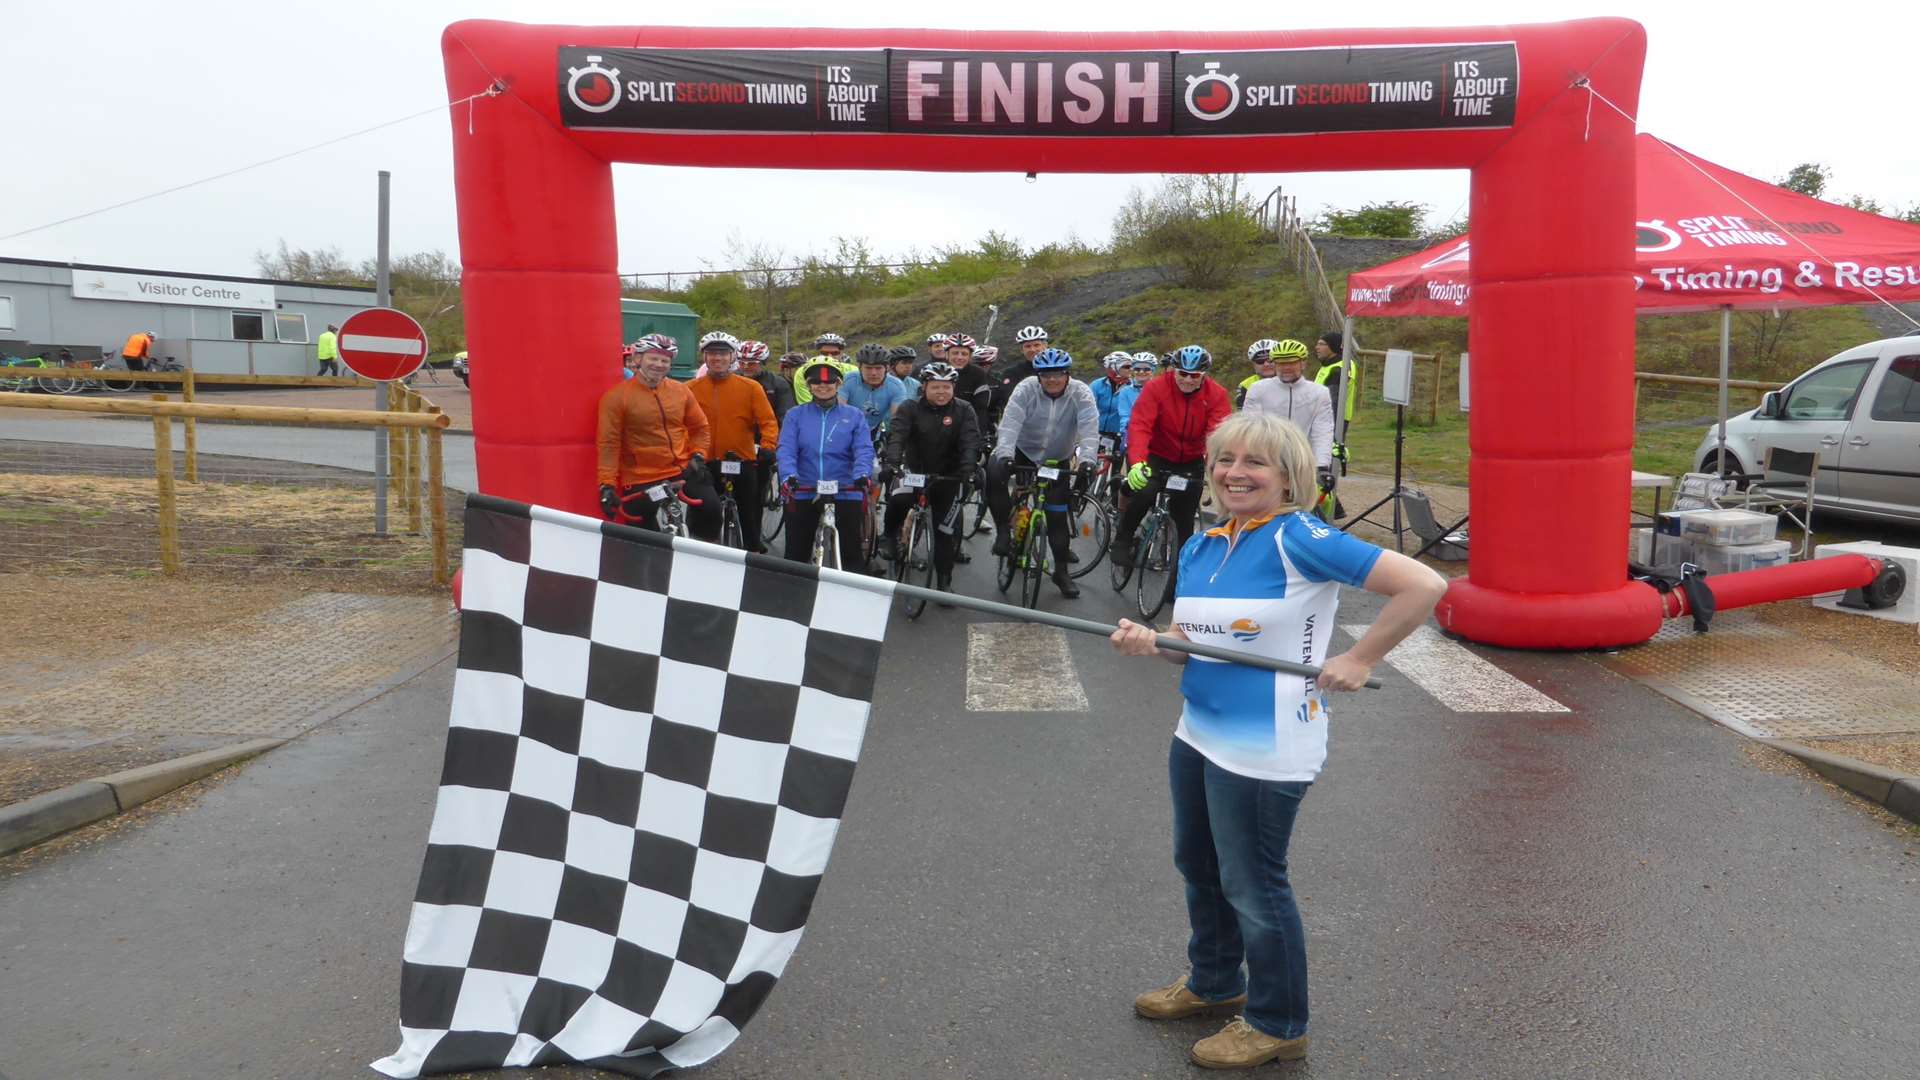 Melanie Rogers from Vattenfall Wind and Power Ltd waves the chequered flag to formally start the ride. The KM Big Bike Ride attracted 370 riders taking part in either the 50km or 100km routes. Riders could take part for fun or for charity. £17k was raised for good causes.